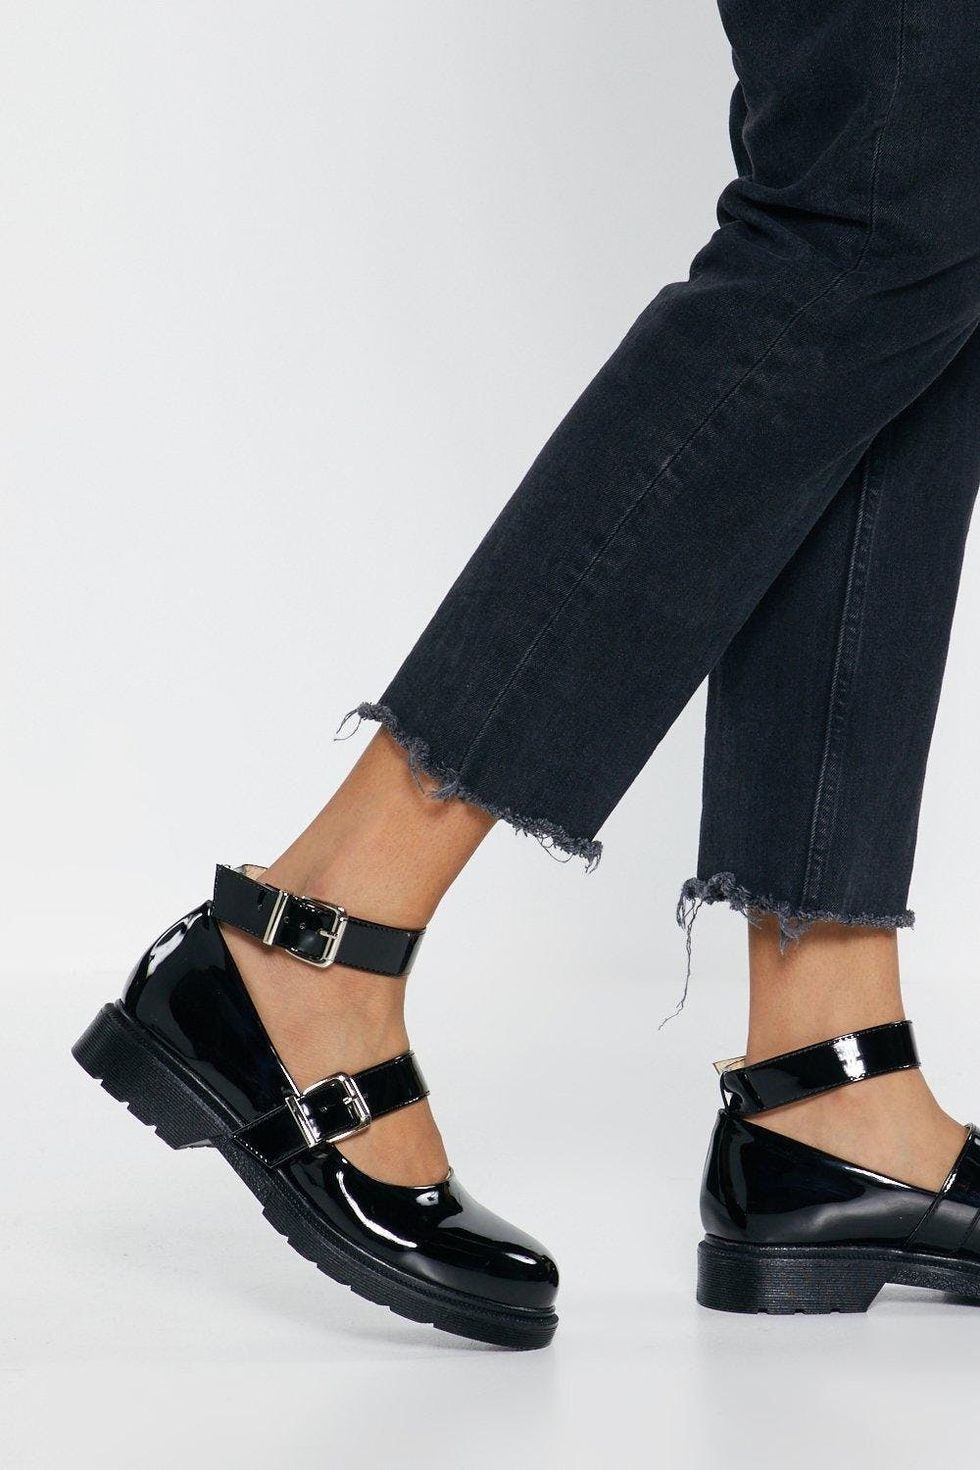 19 Reasons Why Mary Janes Are the Ballet Flats of 2019 - Brit + Co